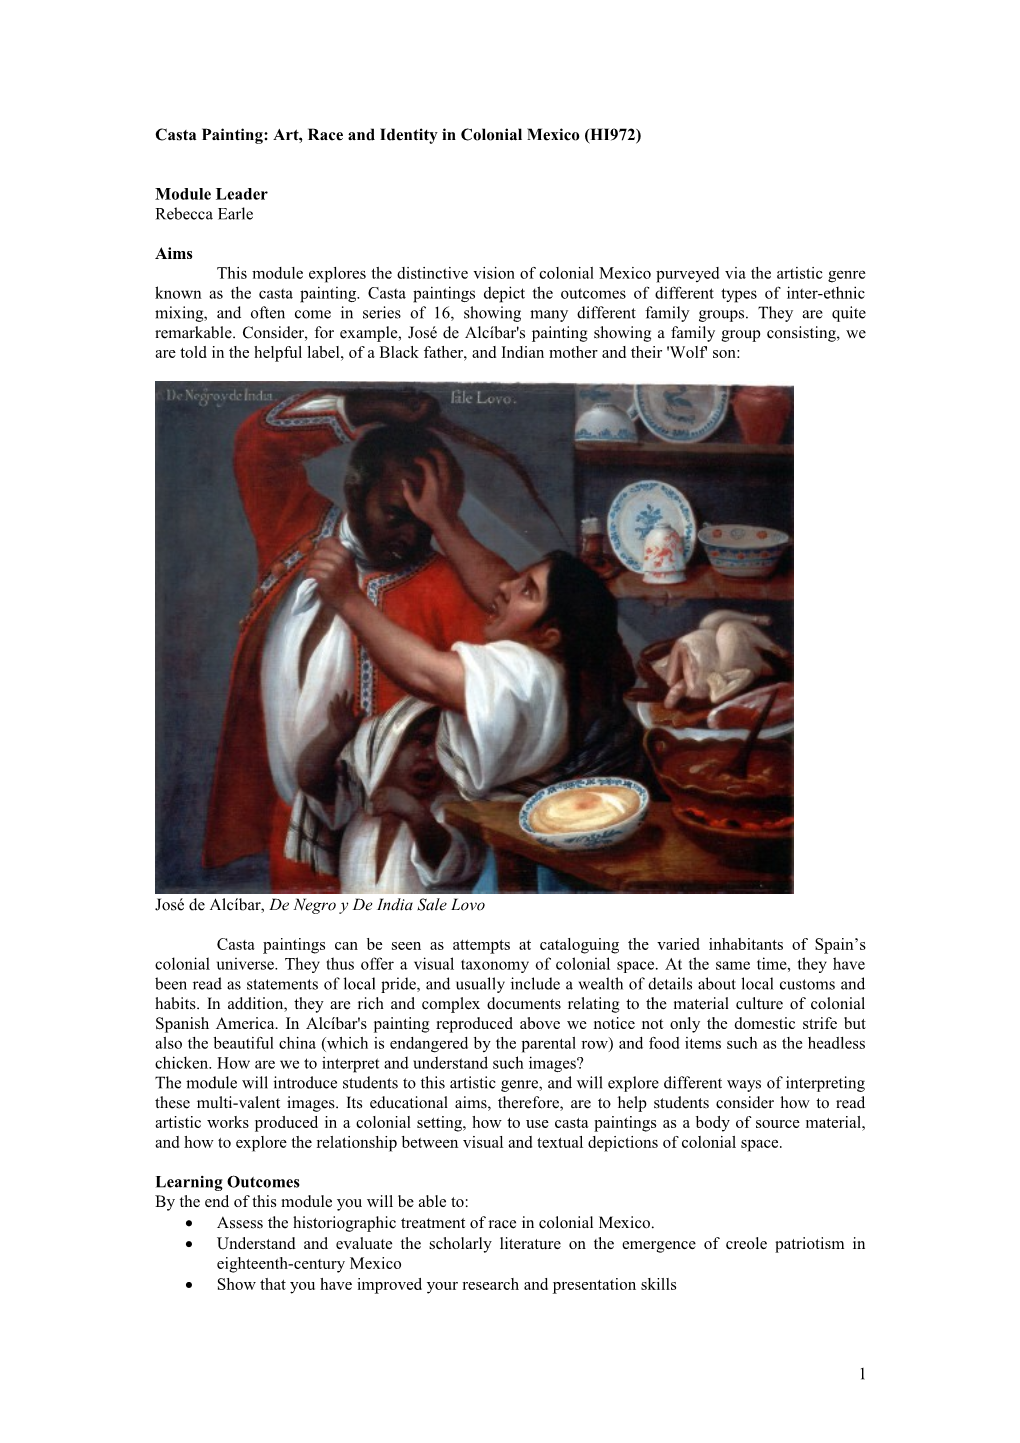 Ilona Katzew, Casta Painting: Identity and Social Stratification in Colonial Mexico , New